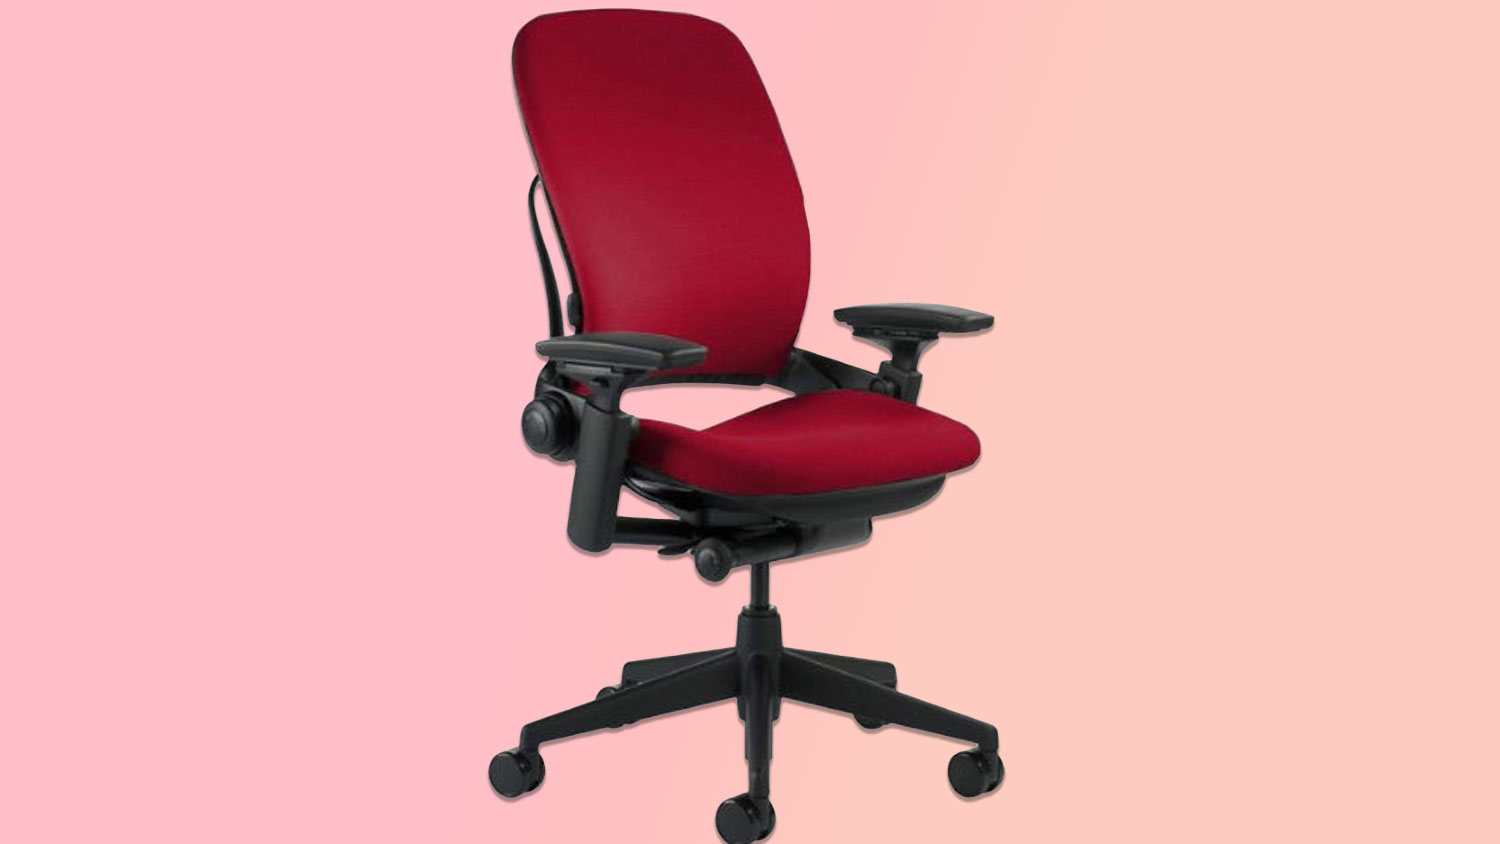 Steelcase Leap office chair